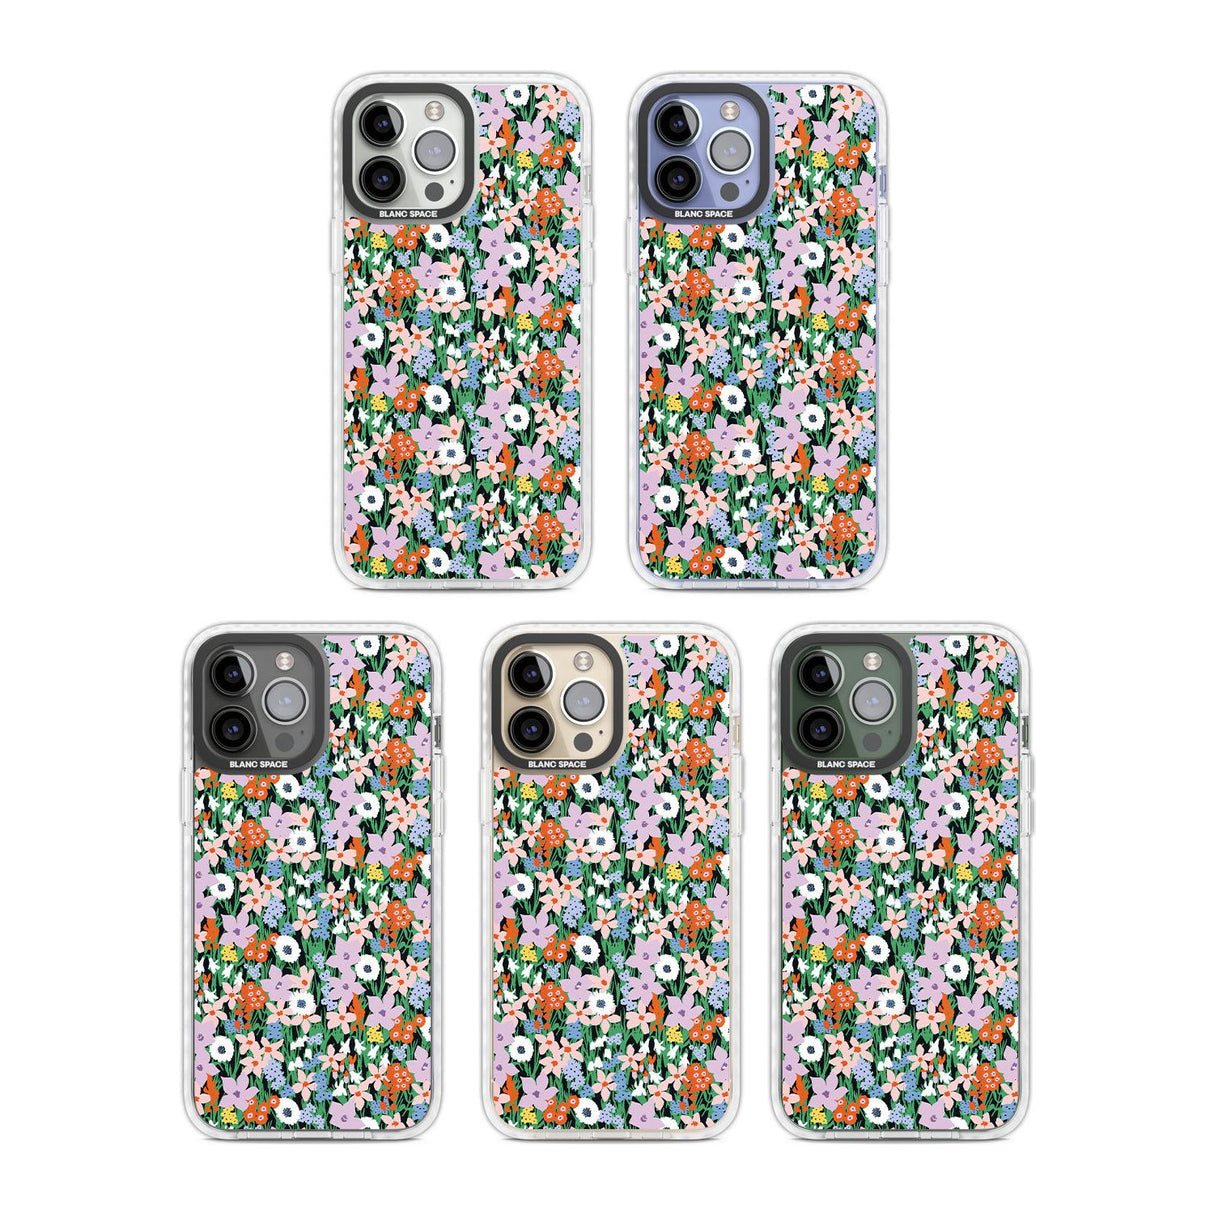 Jazzy Floral Mix: Solid Phone Case iPhone 15 Pro Max / Black Impact Case,iPhone 15 Plus / Black Impact Case,iPhone 15 Pro / Black Impact Case,iPhone 15 / Black Impact Case,iPhone 15 Pro Max / Impact Case,iPhone 15 Plus / Impact Case,iPhone 15 Pro / Impact Case,iPhone 15 / Impact Case,iPhone 15 Pro Max / Magsafe Black Impact Case,iPhone 15 Plus / Magsafe Black Impact Case,iPhone 15 Pro / Magsafe Black Impact Case,iPhone 15 / Magsafe Black Impact Case,iPhone 14 Pro Max / Black Impact Case,iPhone 14 Plus / Bla